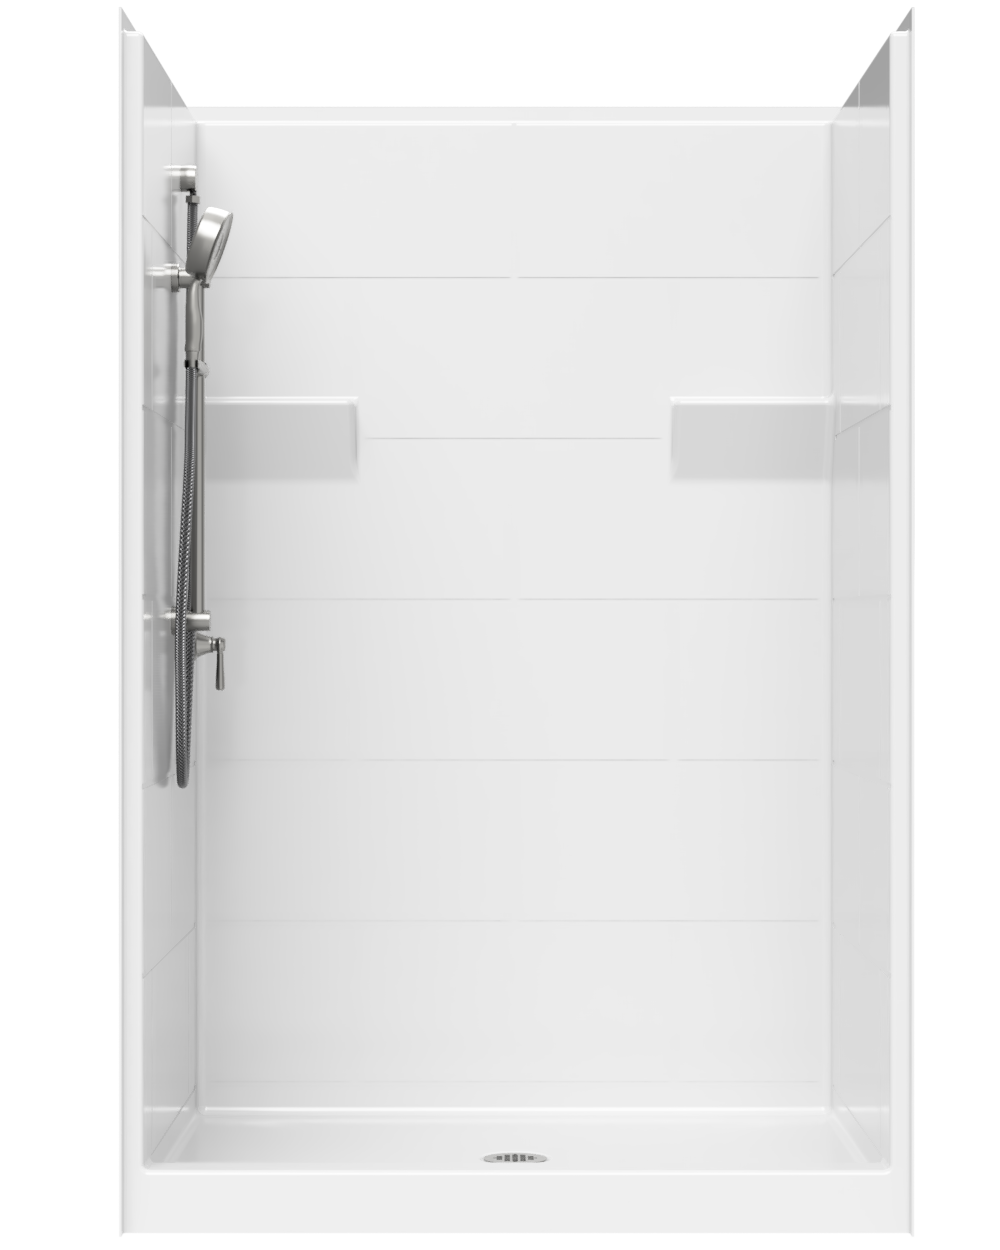 4’ Curbed Shower With Simulated Tile